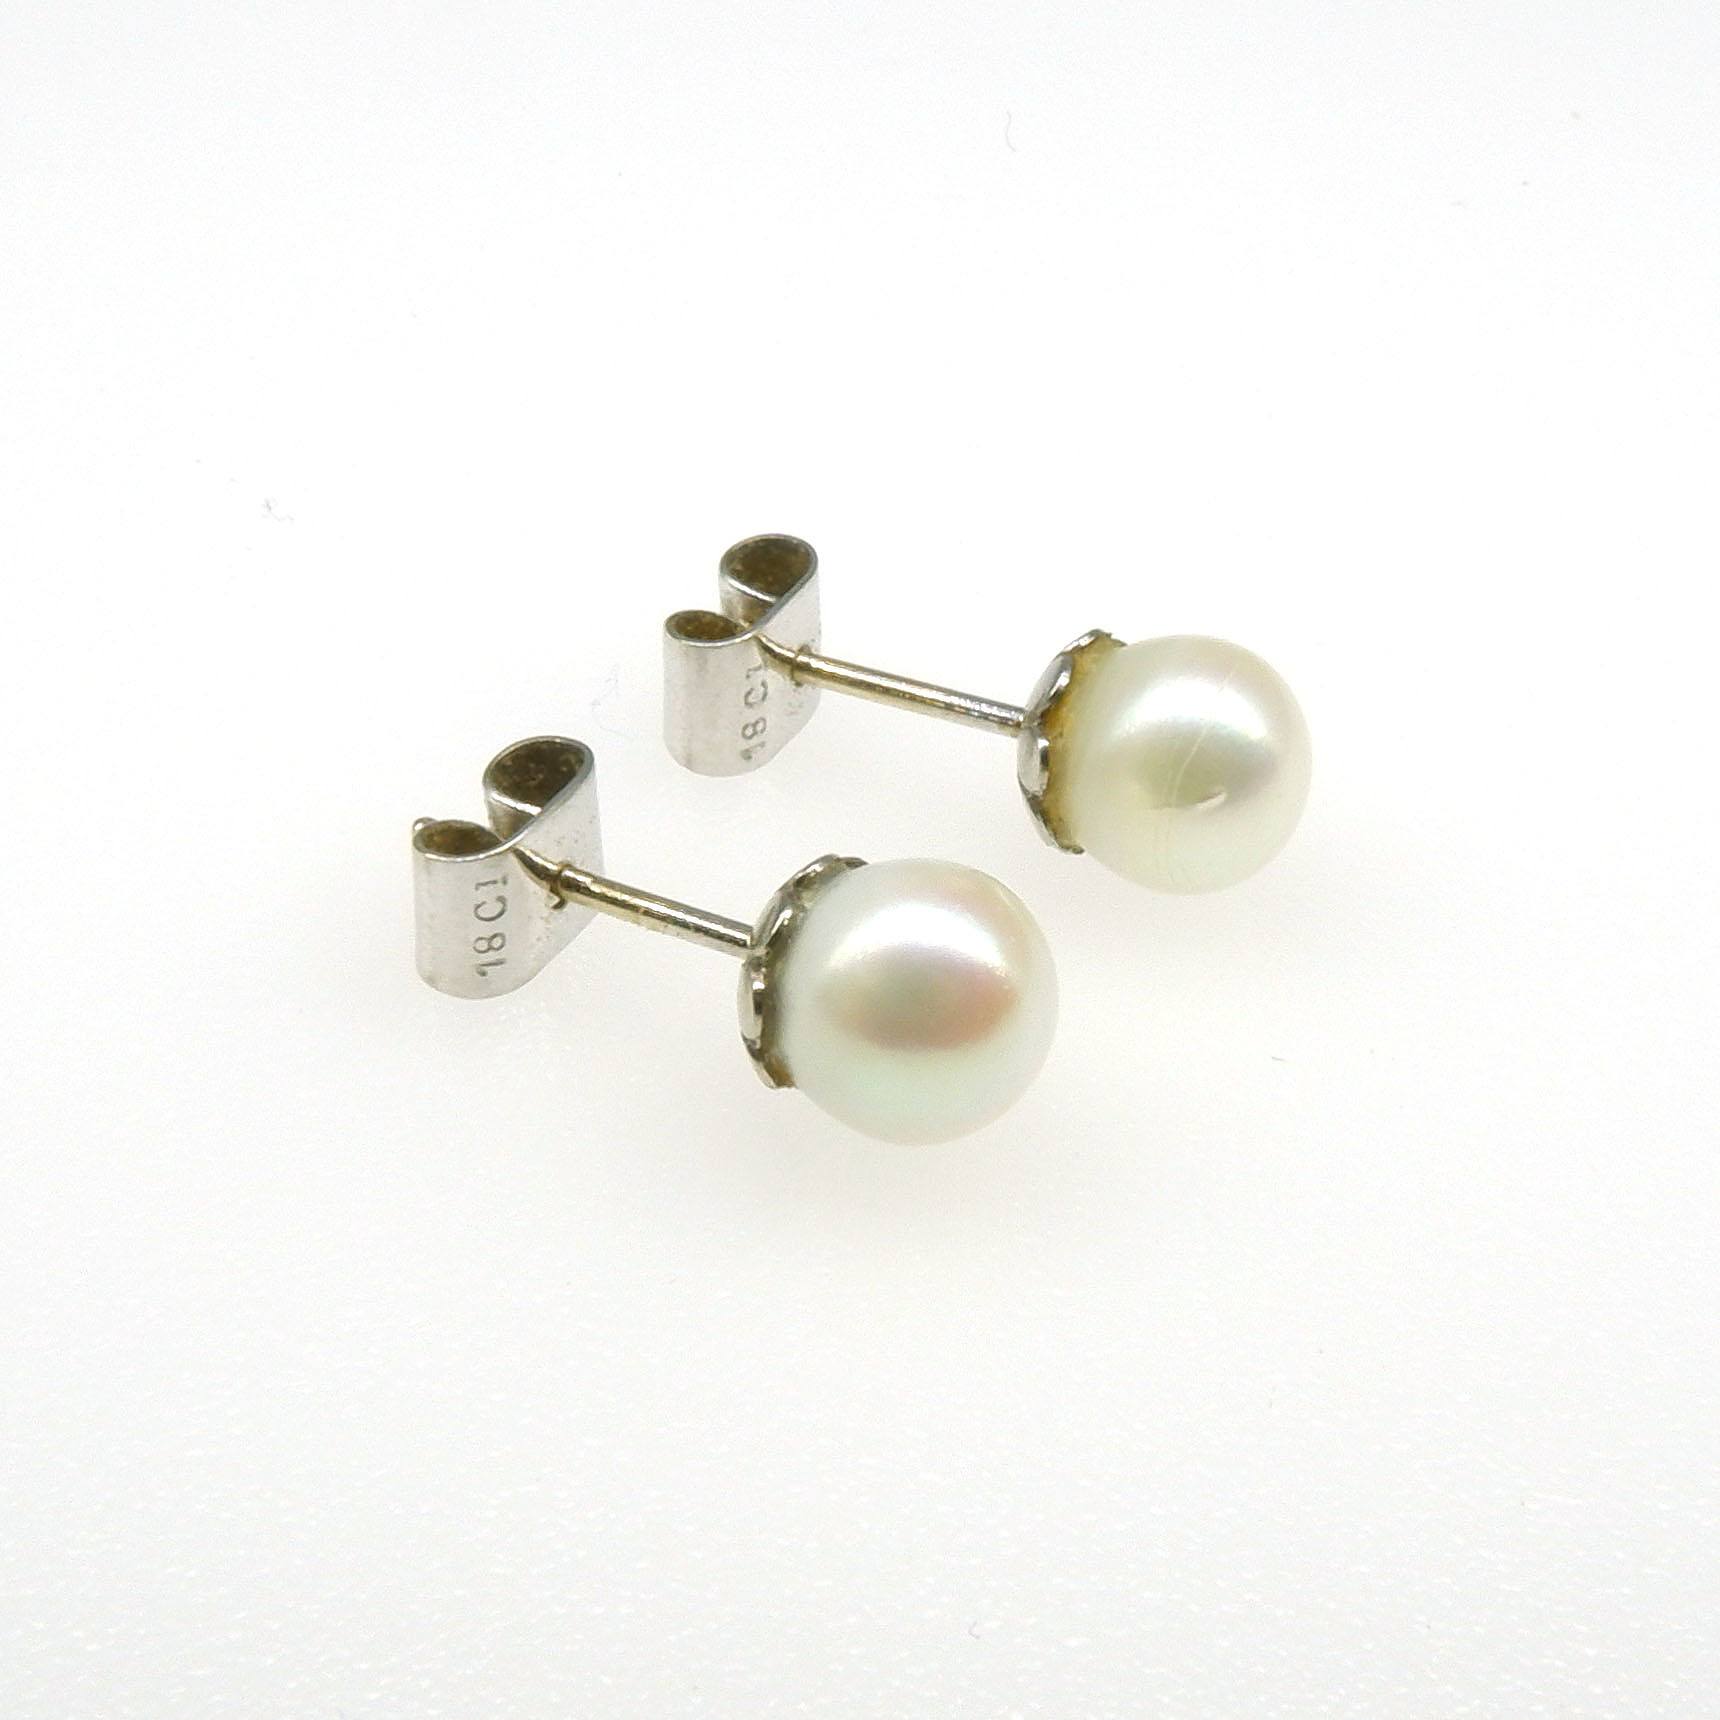 '18ct White Gold Cultured Pearl Studs'